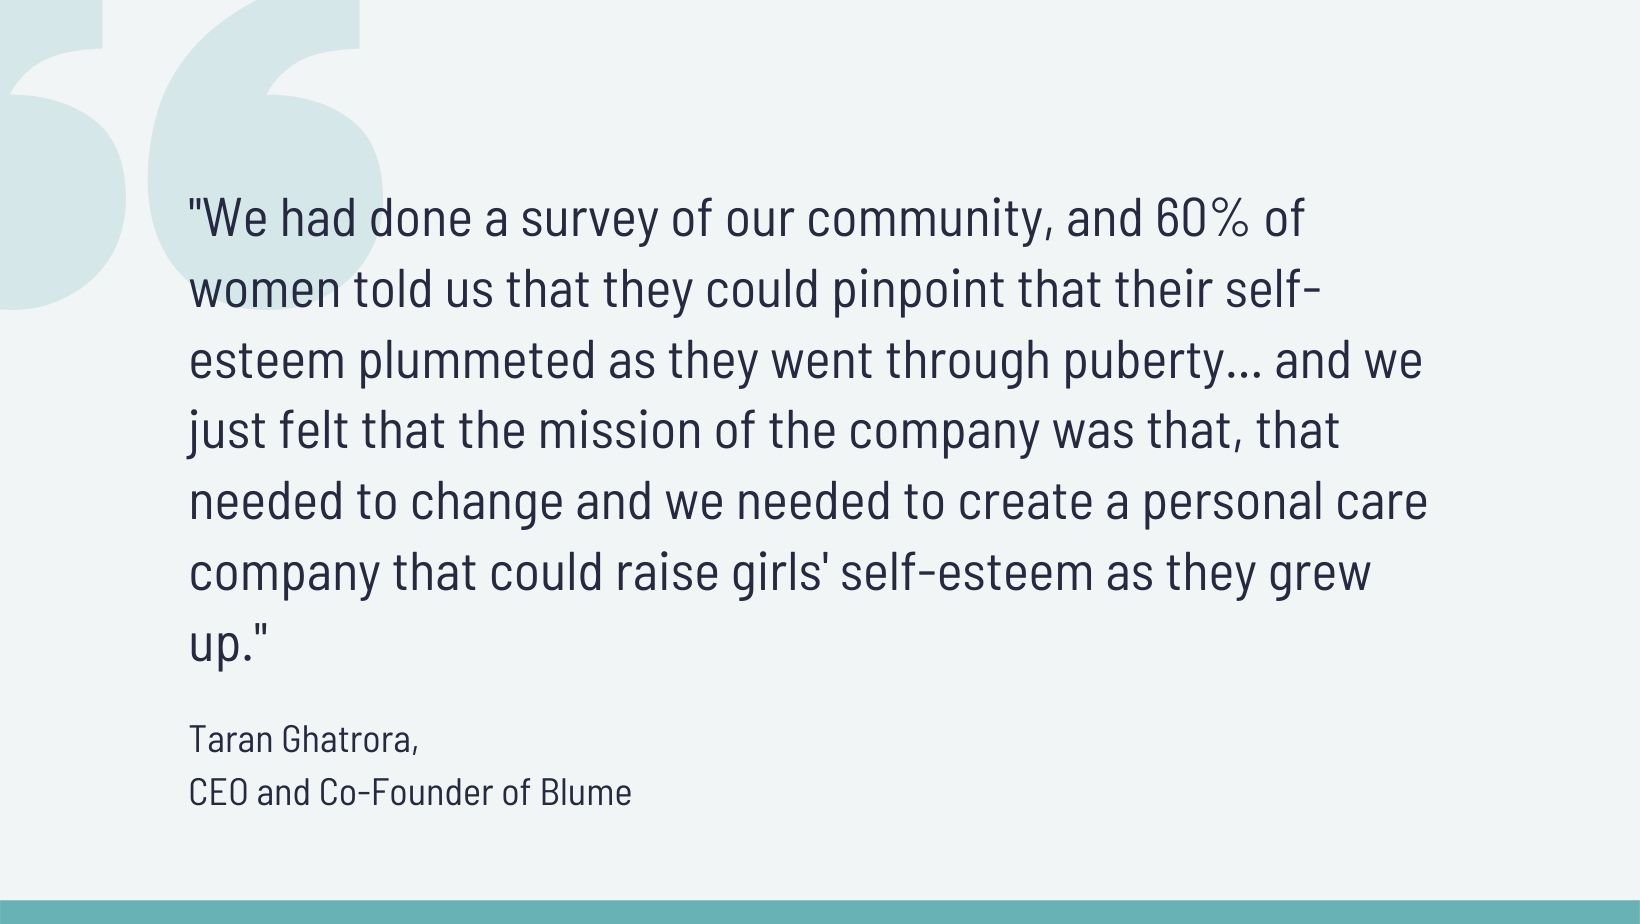 Quote from Taran, co-founder of Blume